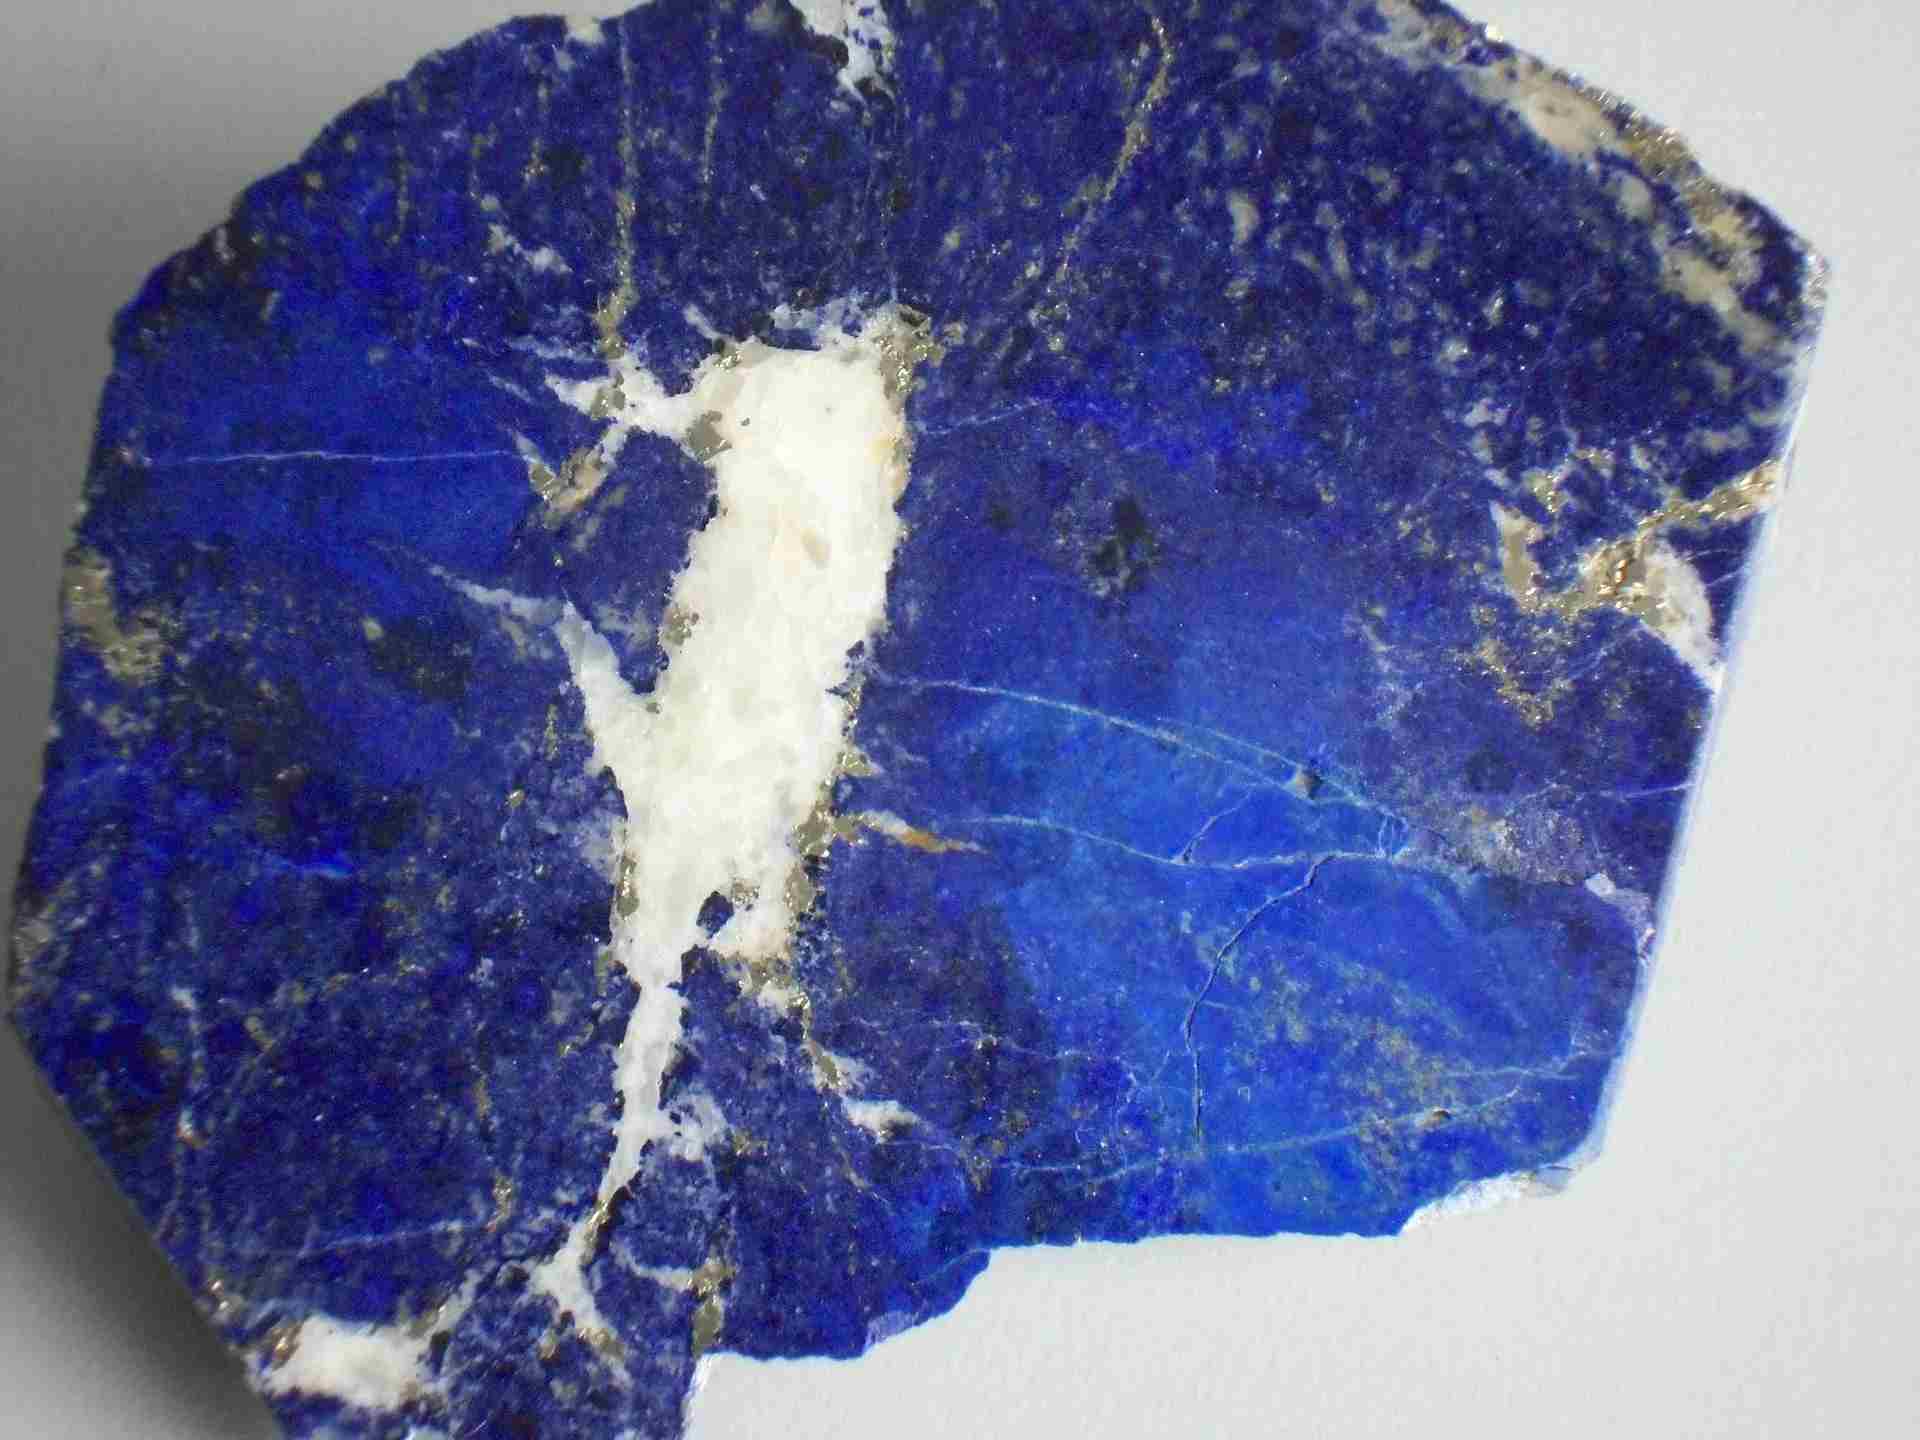 Use of Lapis Lazuli has been going on since the ancient civilizations.